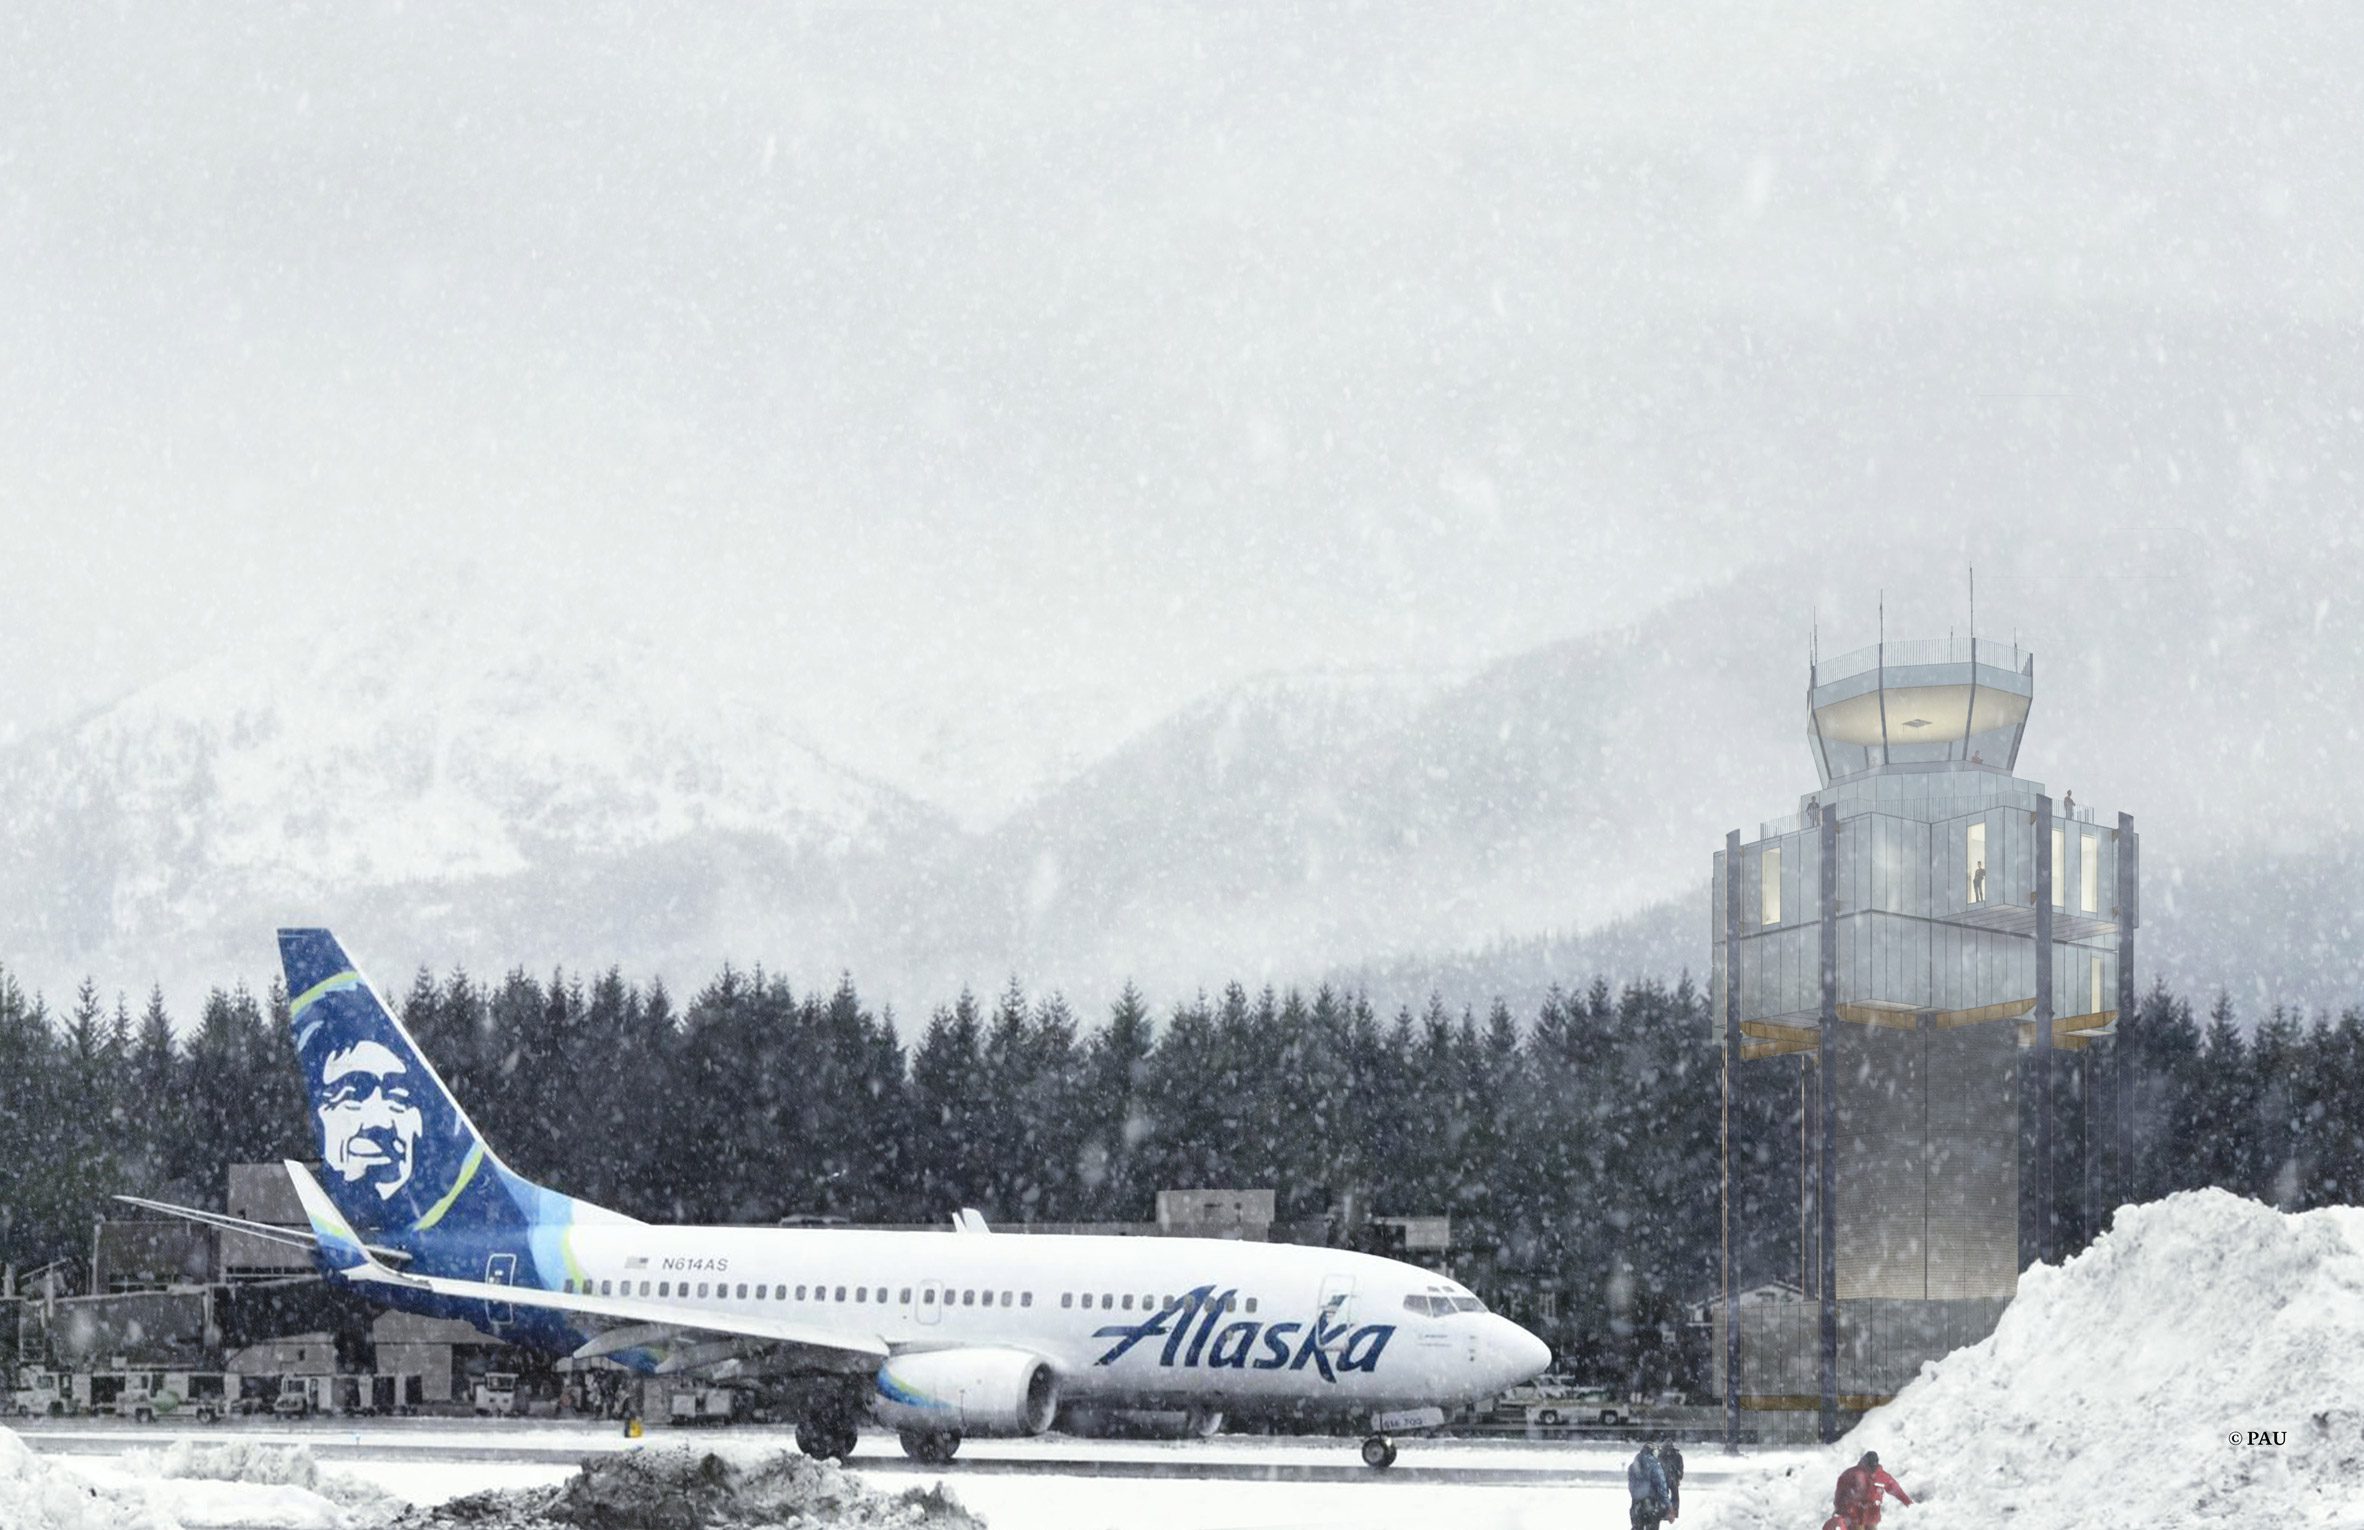 Air traffic control towers in snow with Alaska airline flight and mountains